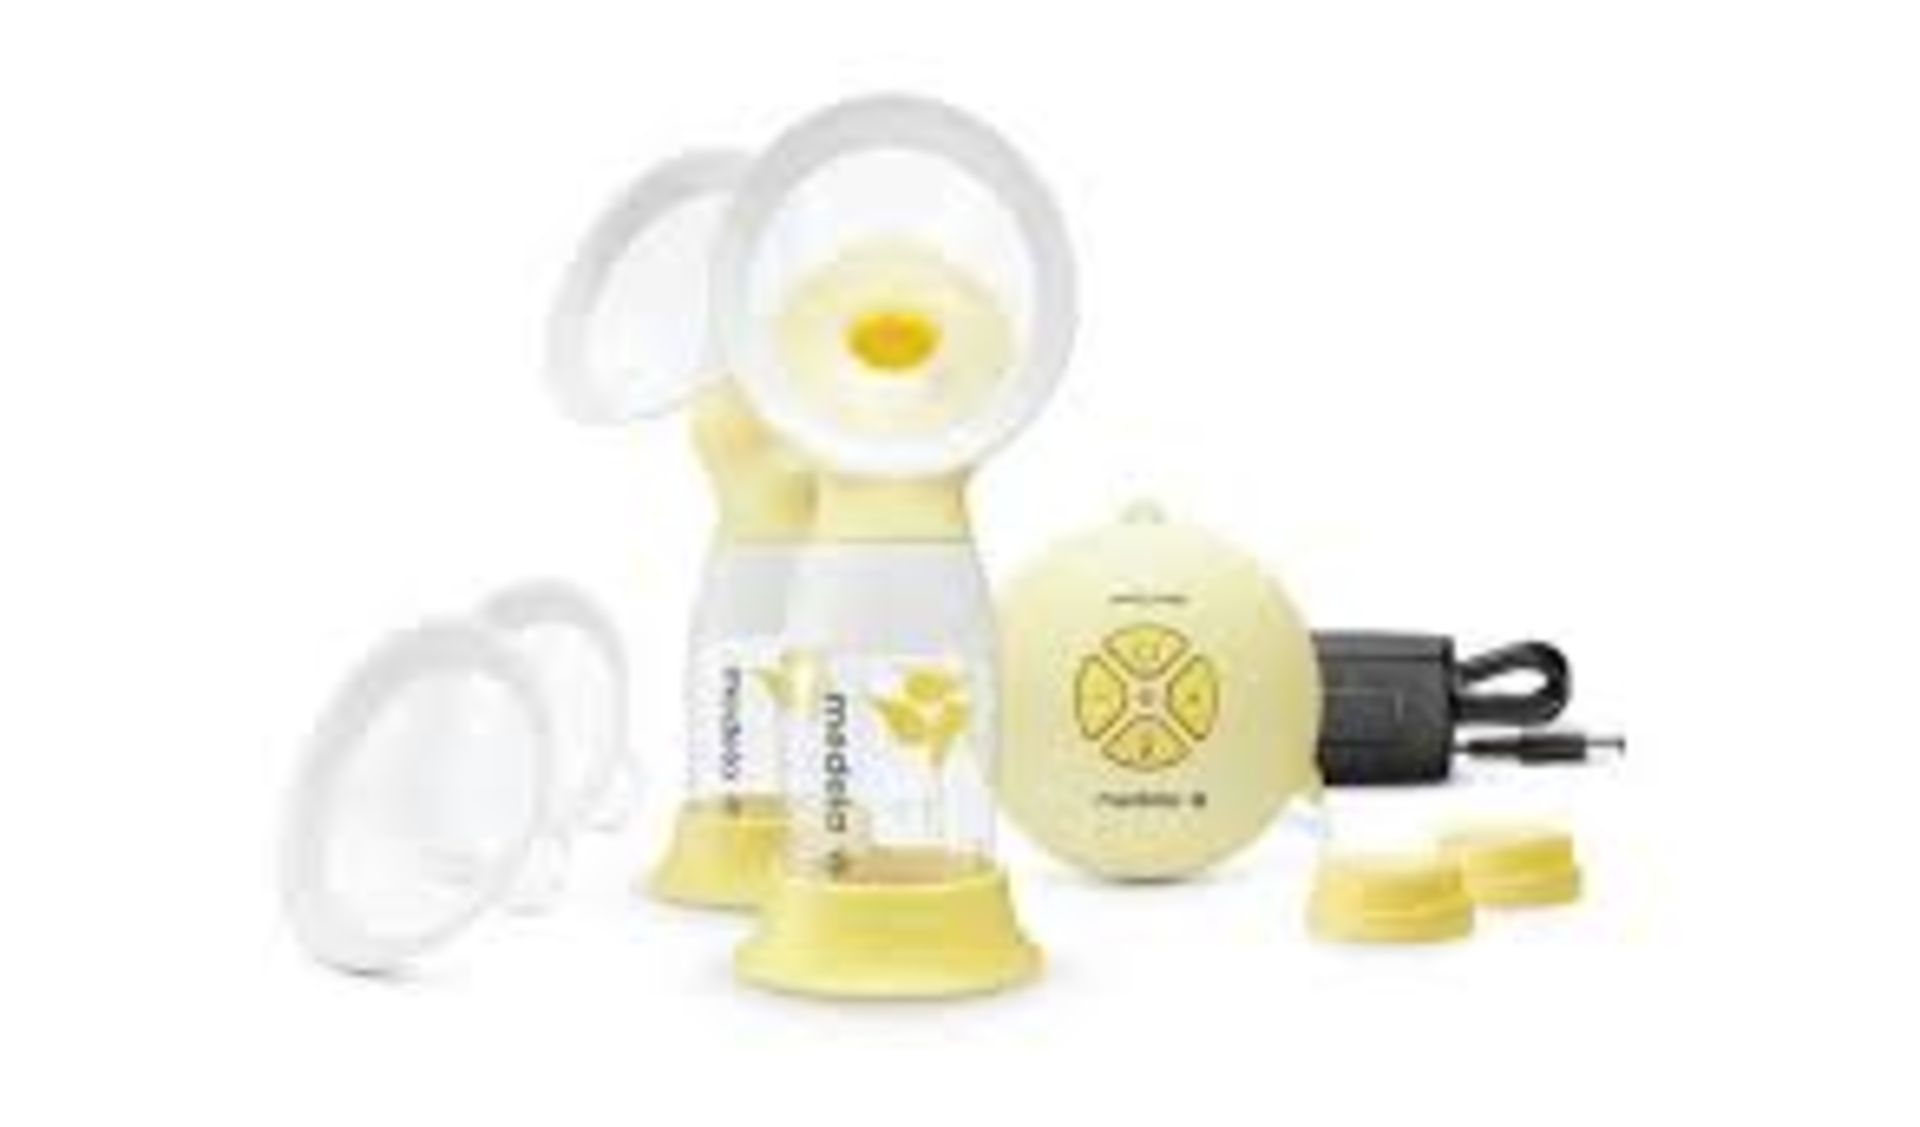 Boxed Medela Swing Maxi Flex Twin Electric Breast Pump RRP £120 (RET00502872) (Public Viewing and